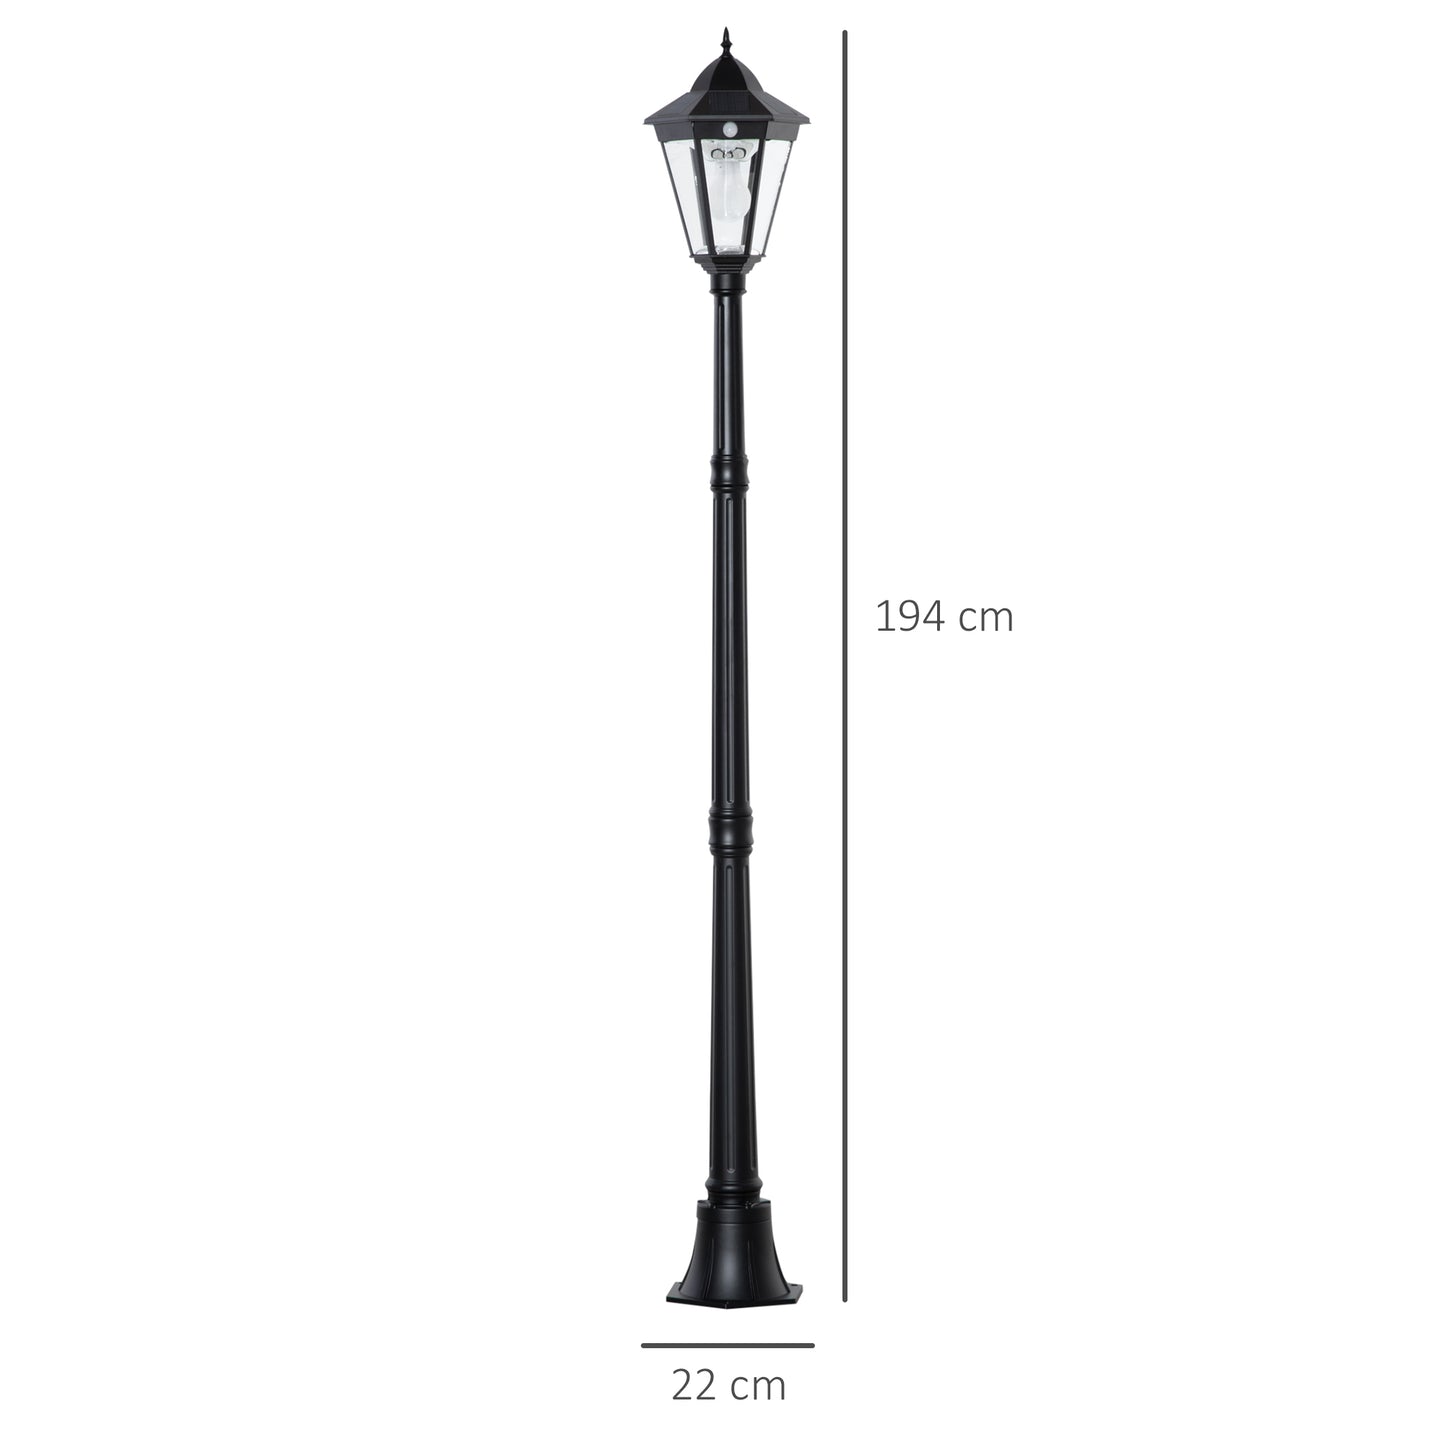 Outsunny 1.9M Garden Lamp Post Light, IP44 Outdoor LED Solar Powered Lantern Lamp with Aluminium Frame for Patio, Pathway and Walkway, Black